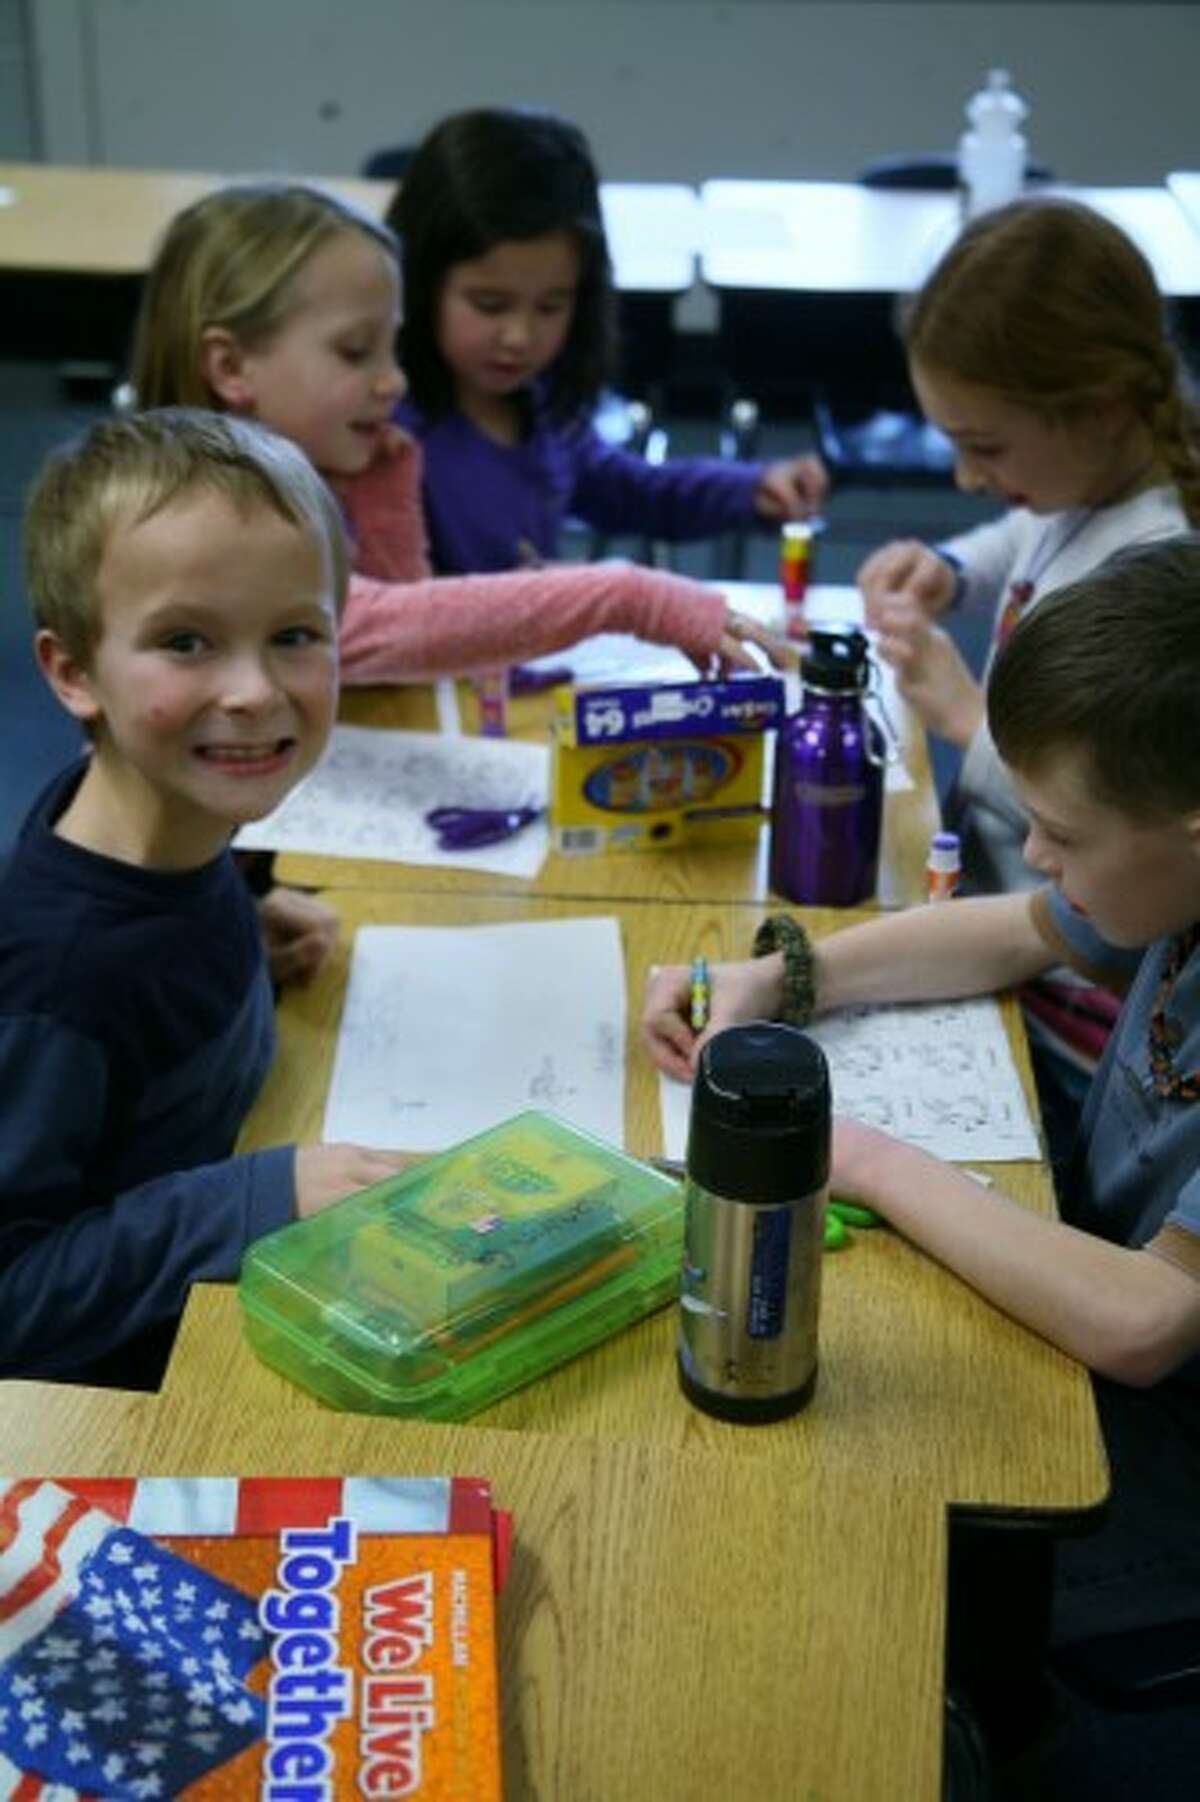 ALPHABETICAL: Second-grade students in Karen King’s class at Brookside Elementary School work on an exercise on Thursday putting reindeer in alphabetical order by name. (Pioneer photos/Lauren Fitch)